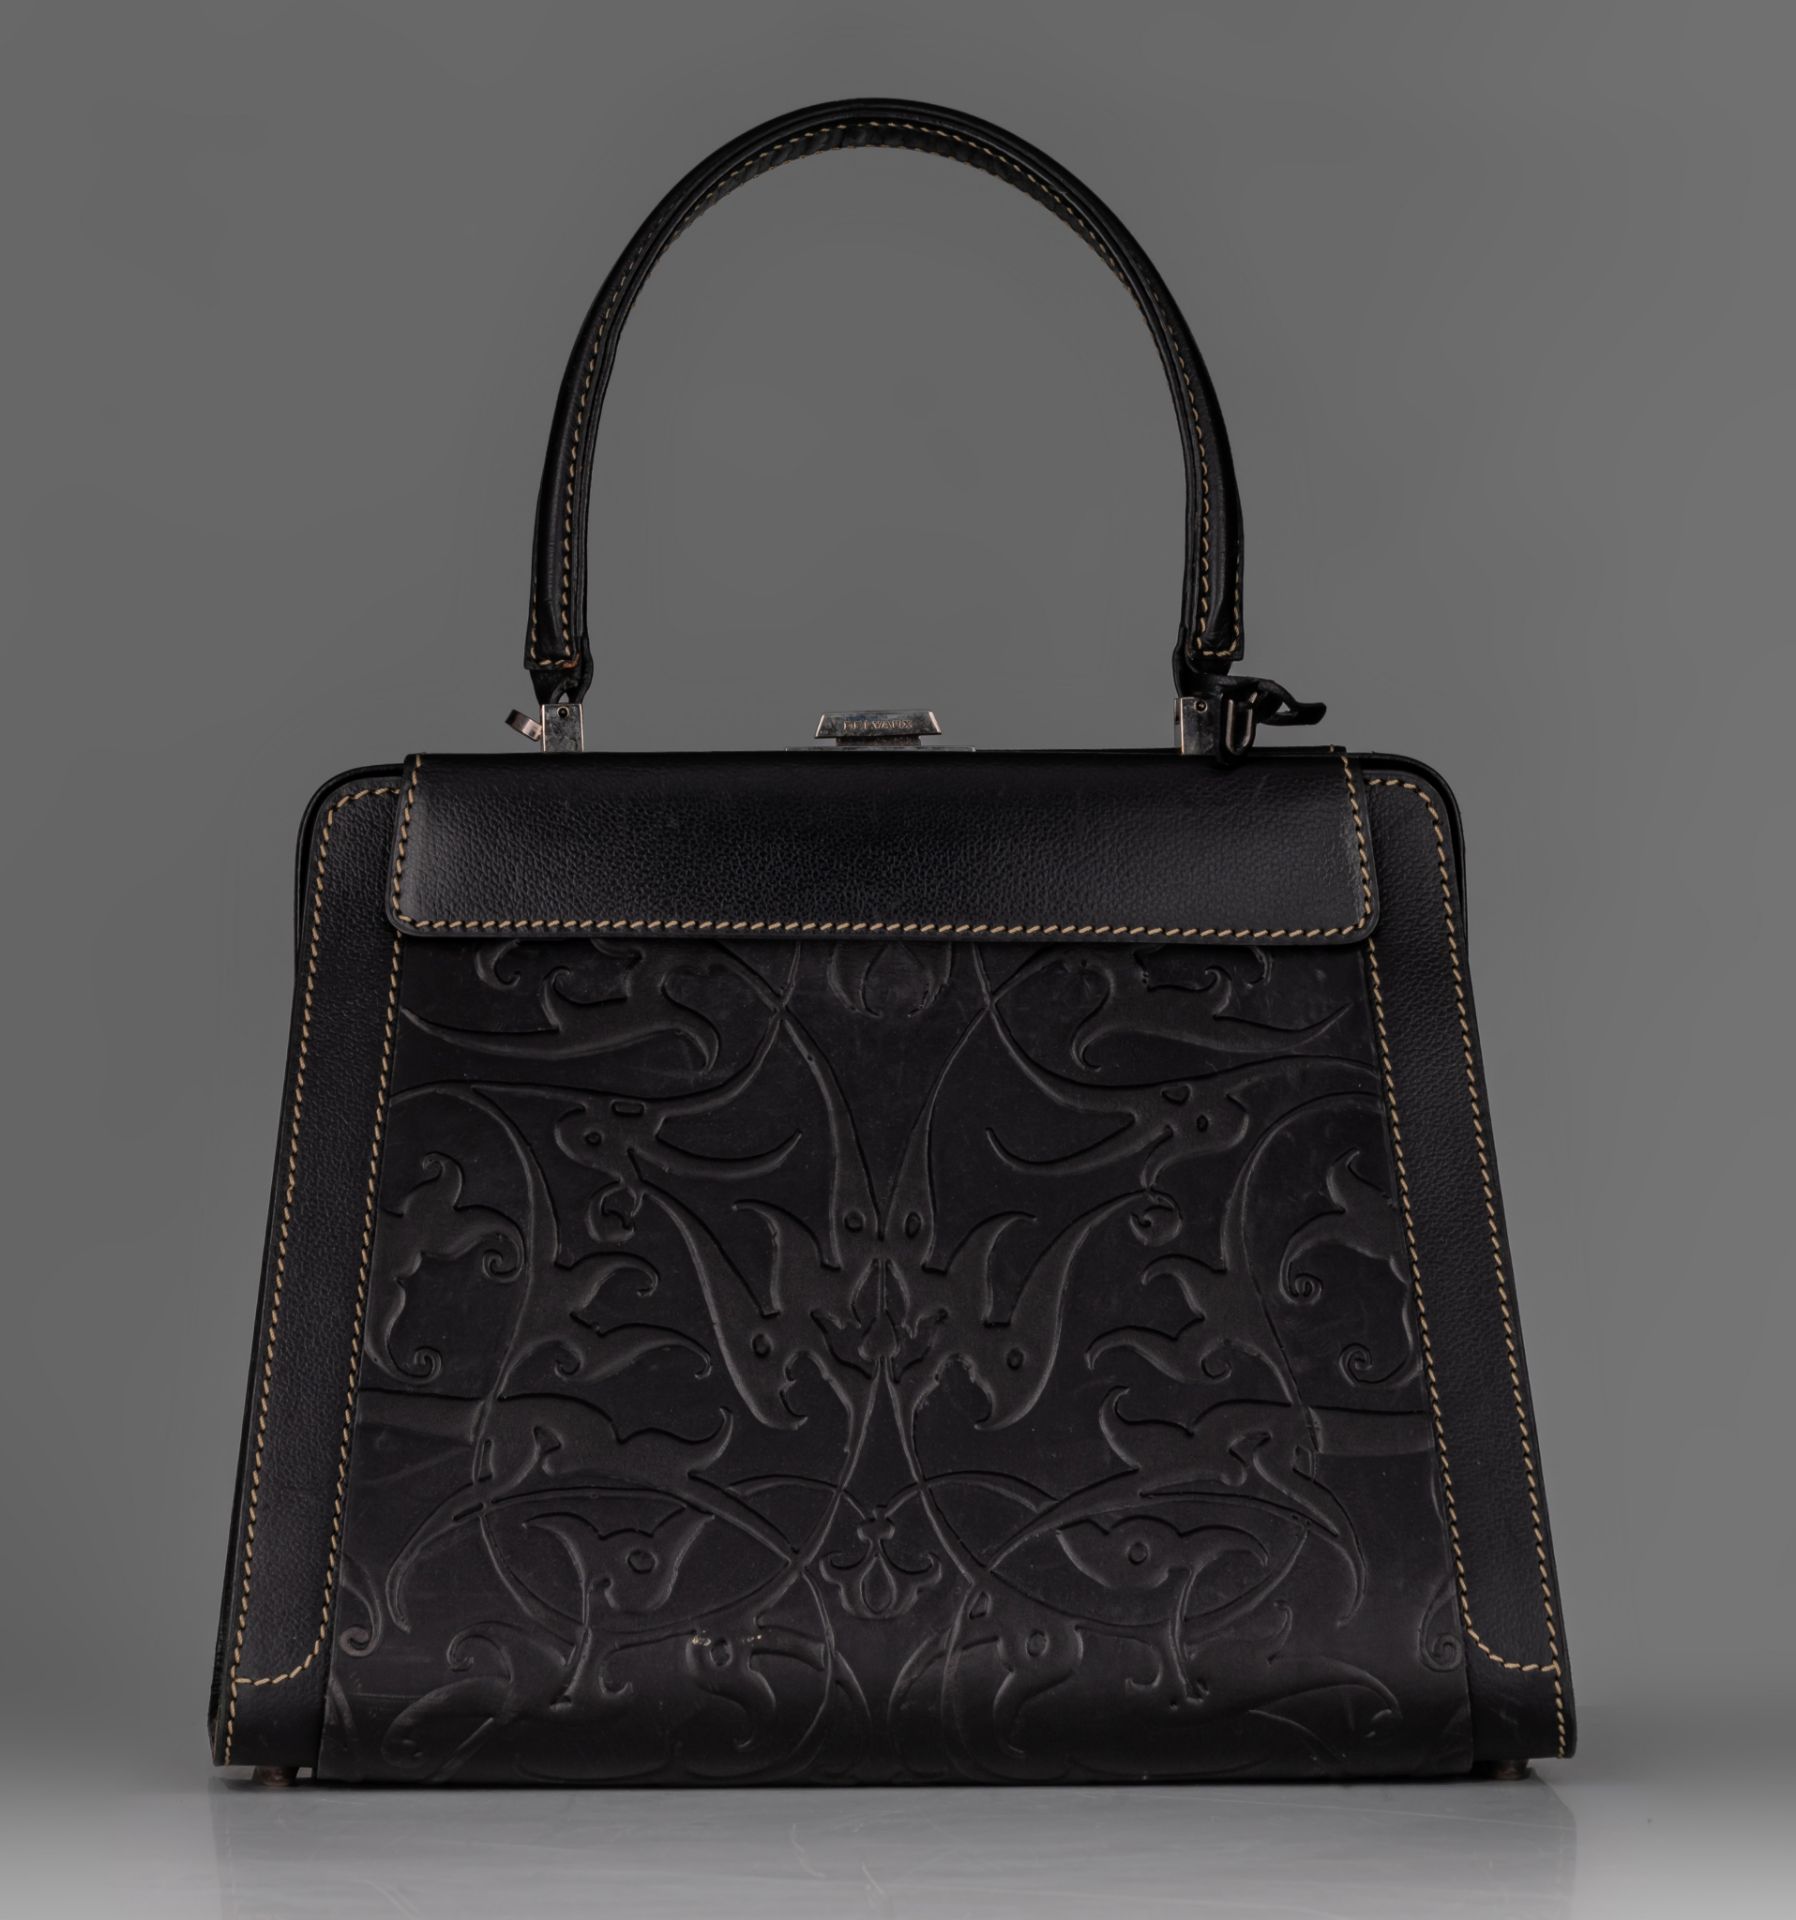 A Delvaux 'Jumping Illusion' handbag in black leather, with adjustable covers - Image 6 of 15